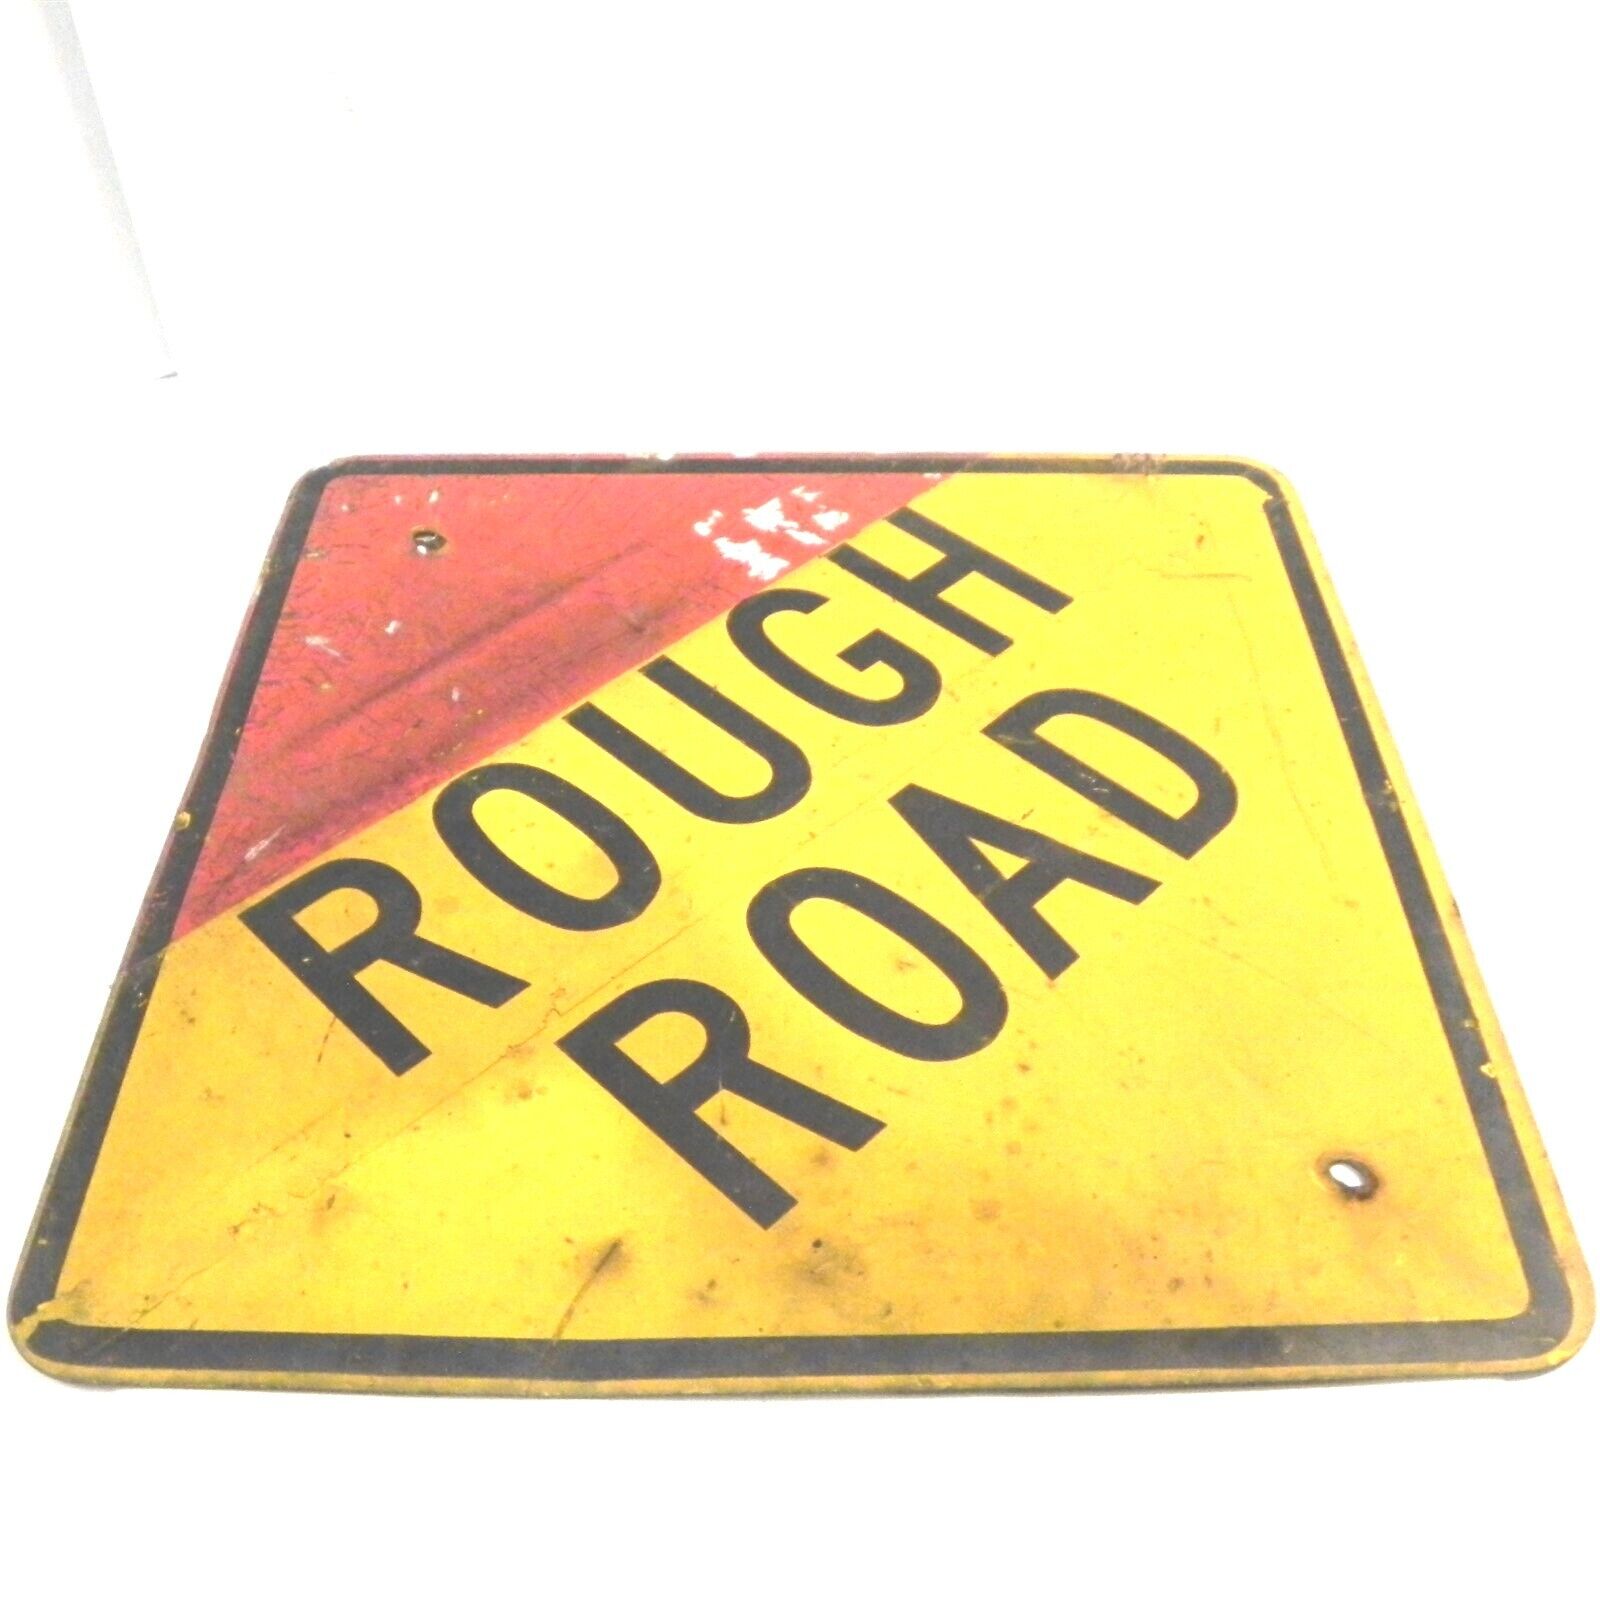 VINTAGE ROUGH ROAD SIGN REFLECTIVE PAINTED SIGN EARLY ROAD SIGN VTG COLLECTABLE